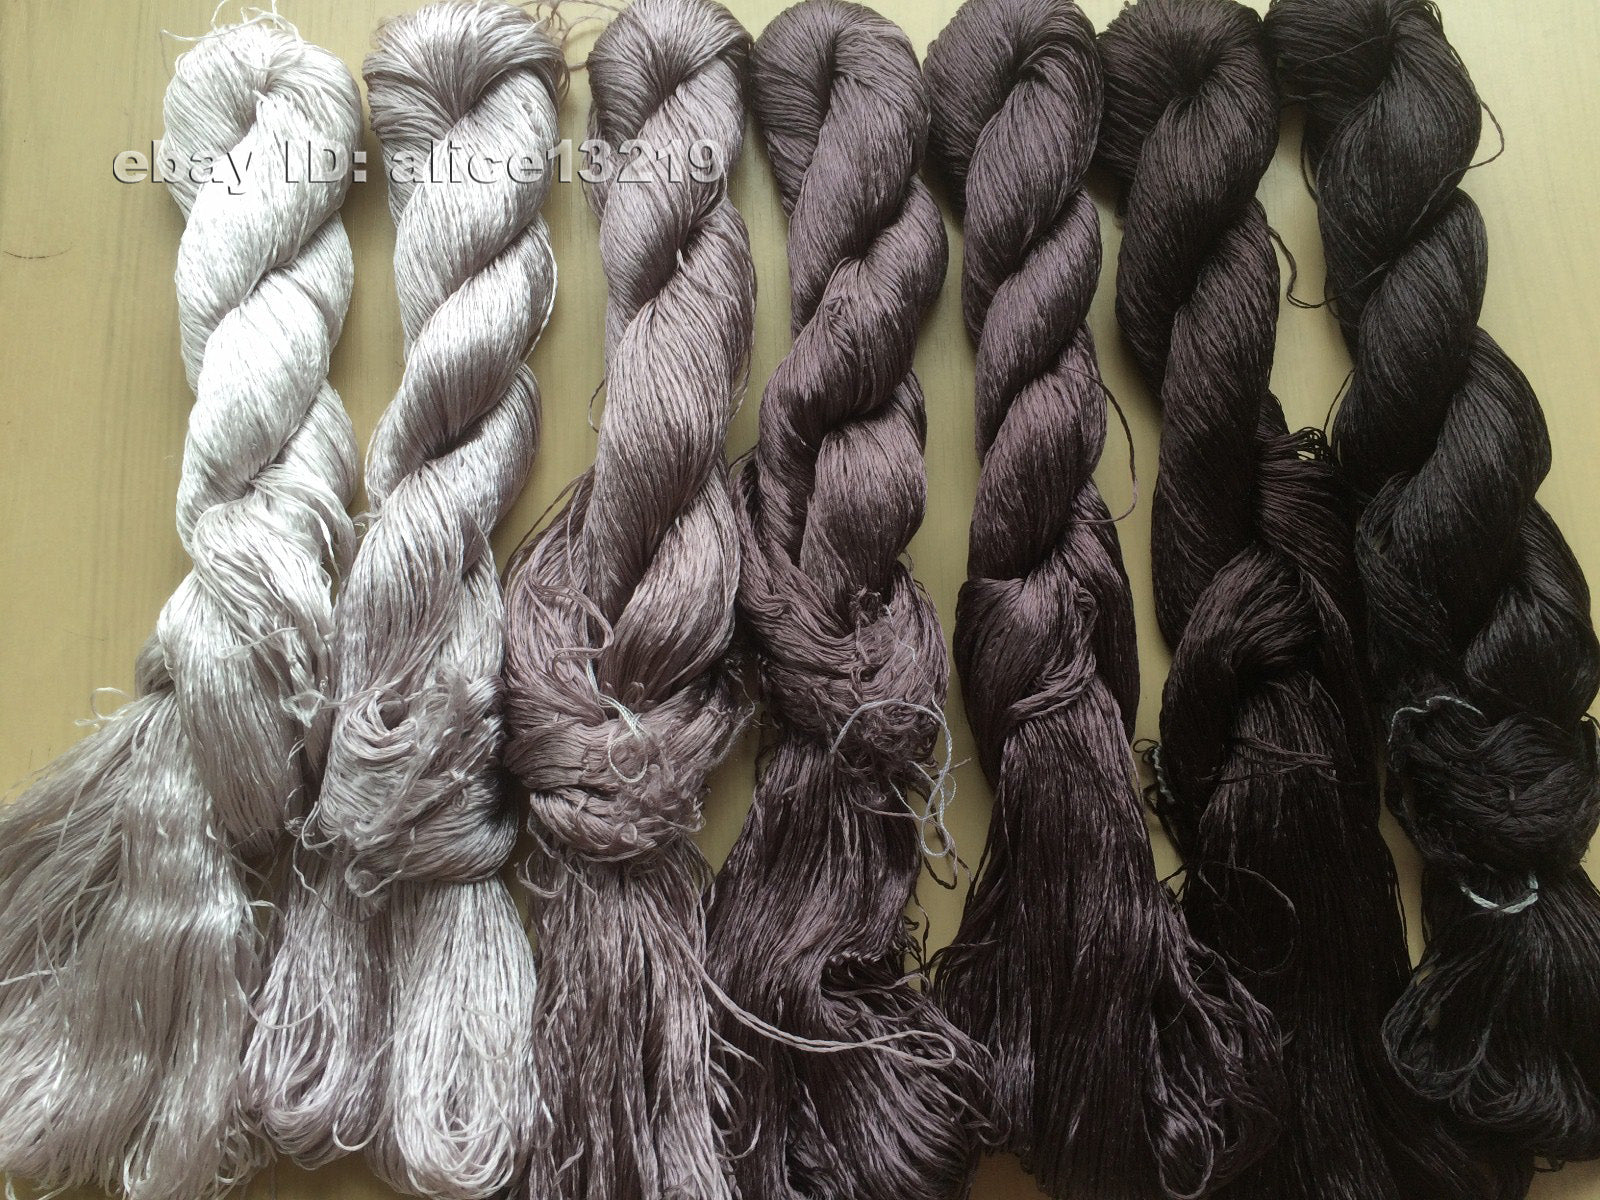 7bundles 100%real mulberry silk,hand-dyed embroidery silk floss/thread N14